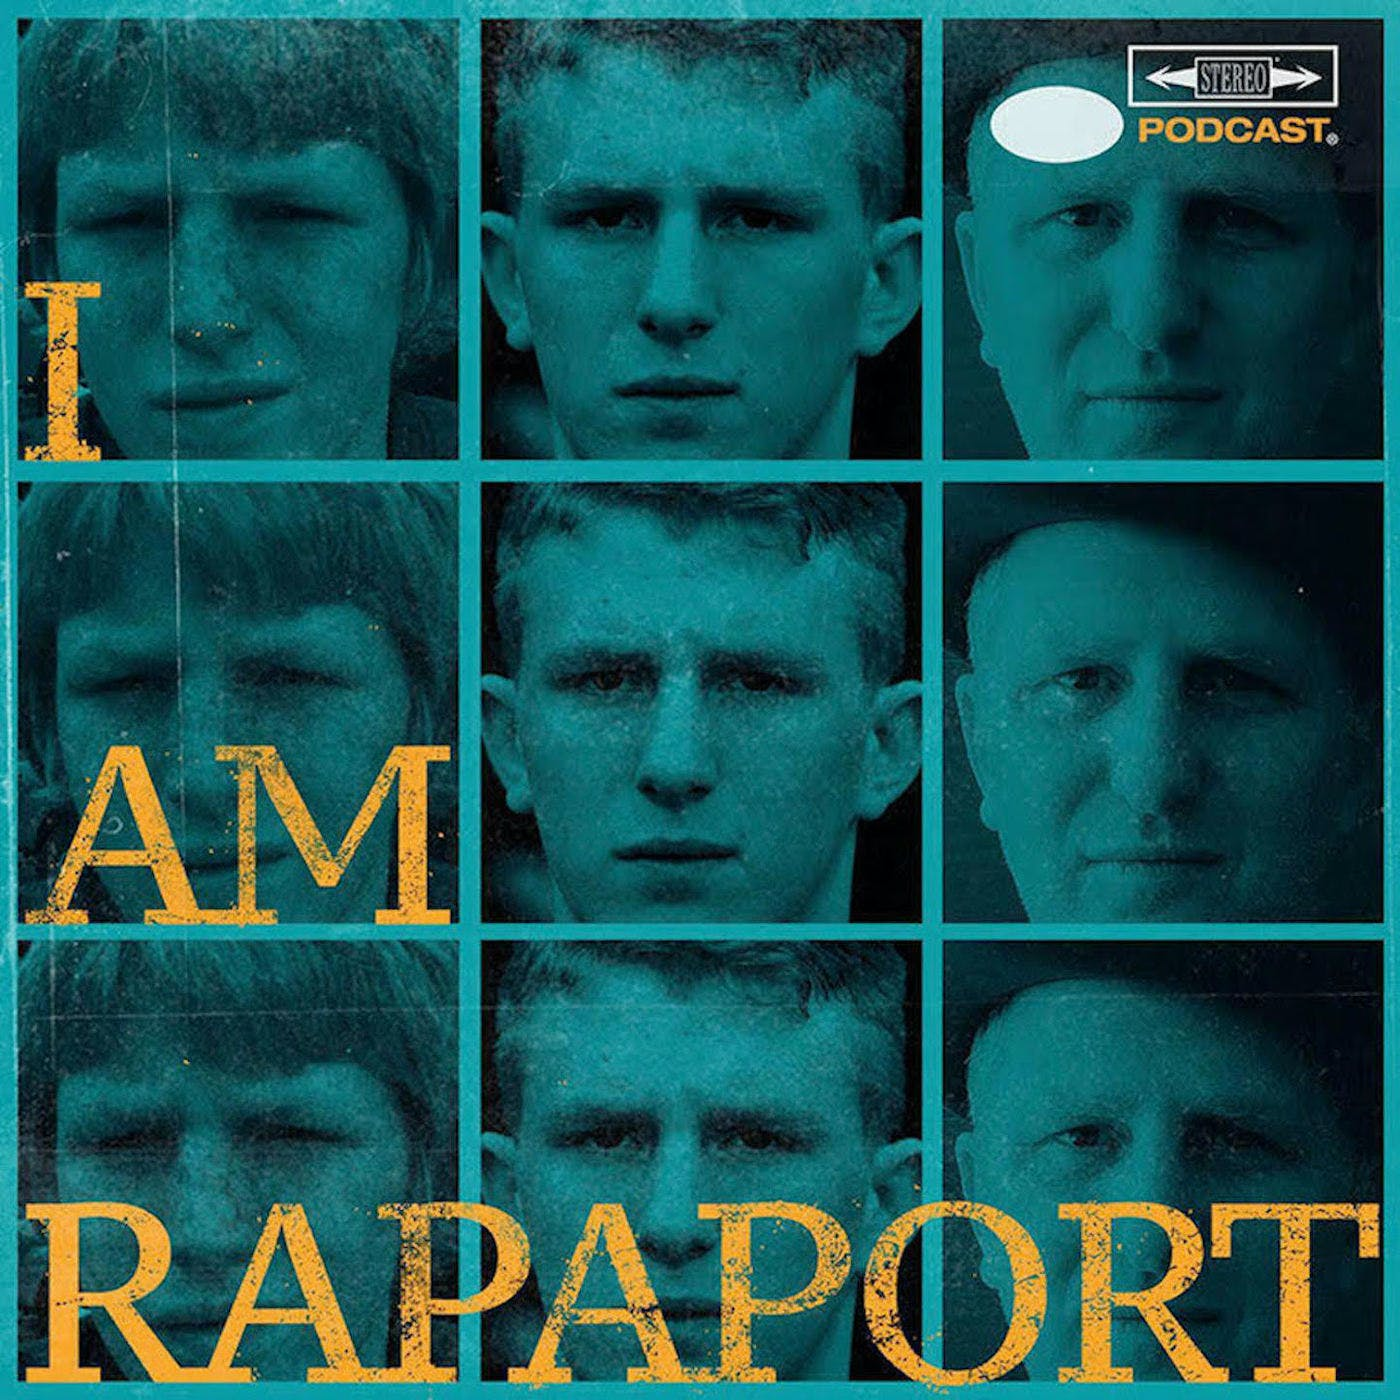 EP 90 - BEST OF I AM RAPAPORT: STEREO PODCAST FIRST EDITION - BGM